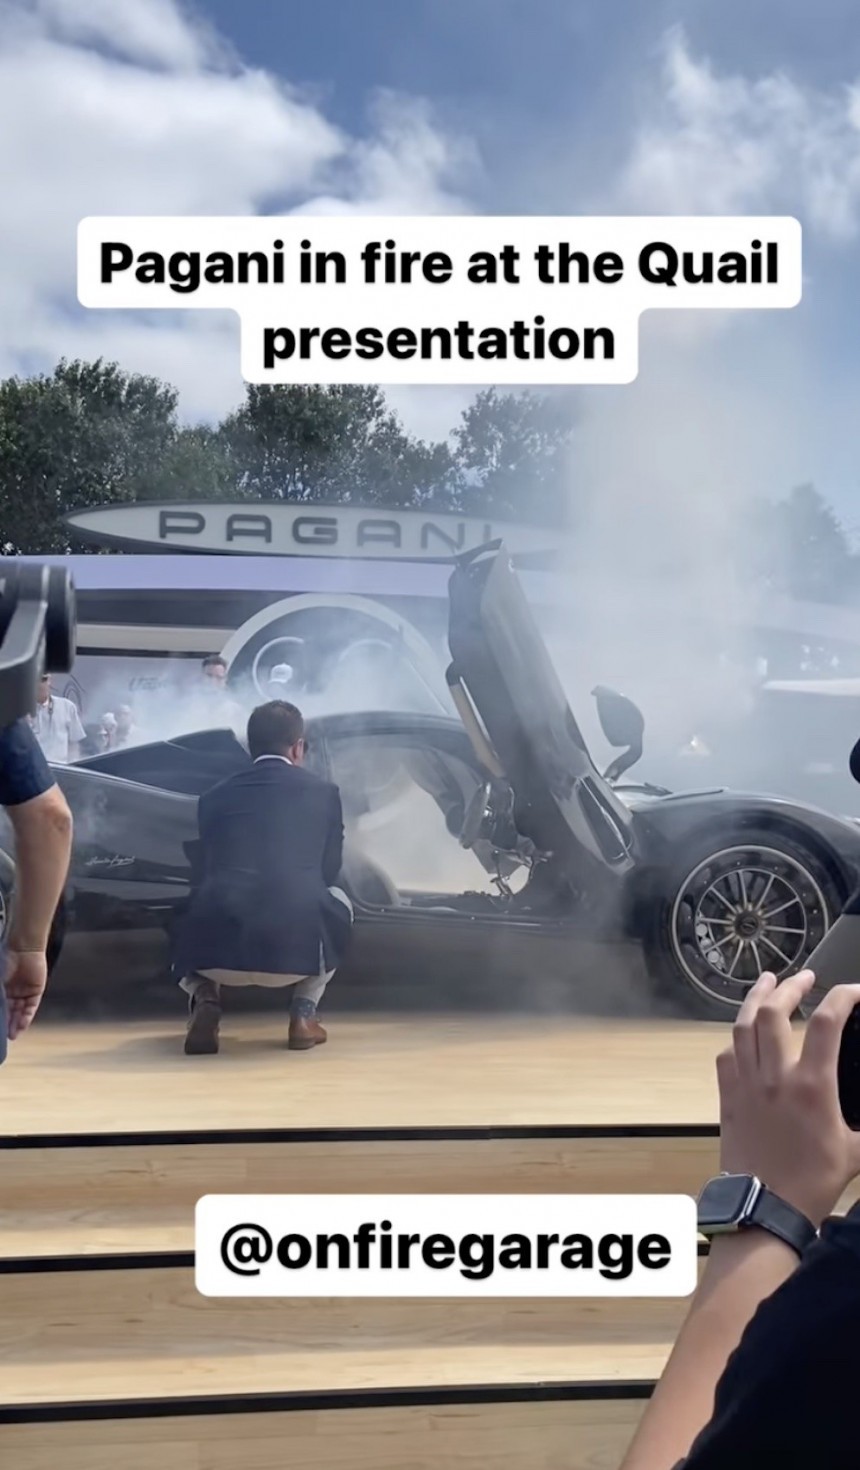 Everyone thought that the Pagani Utopia was on fire